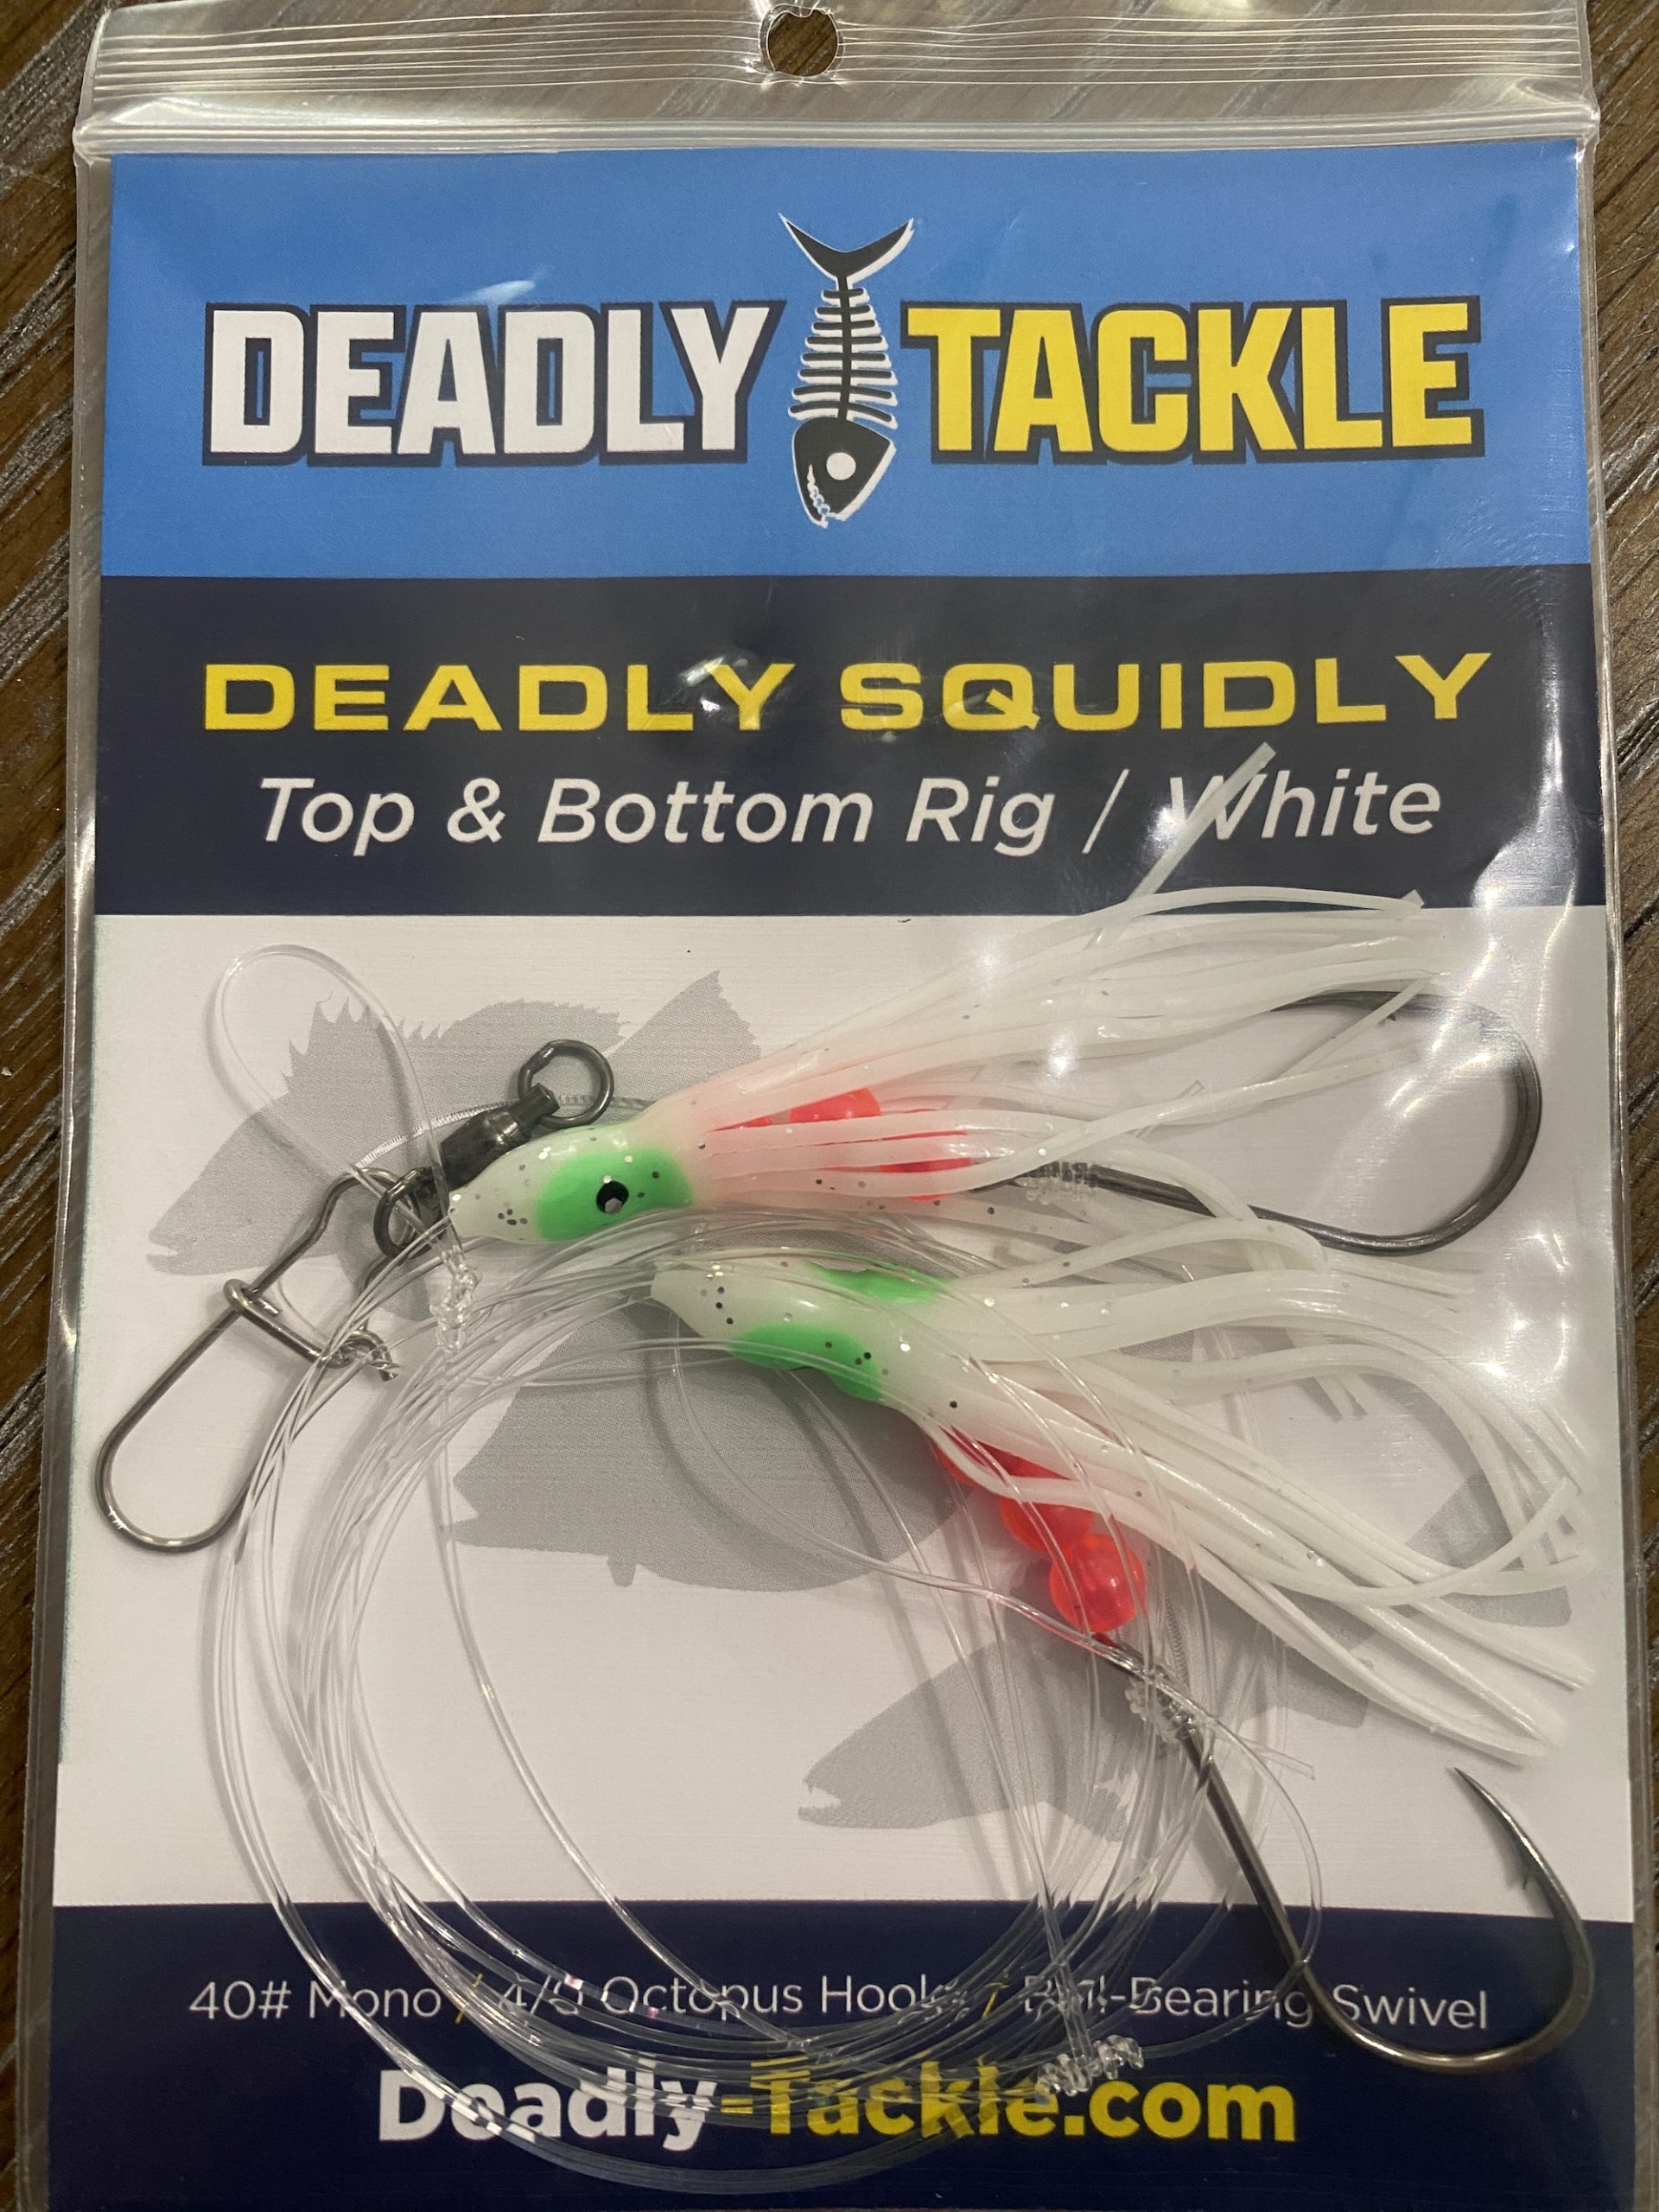 Deadly Tackle White Squidly - Fishing Reports & News Ocean City MD